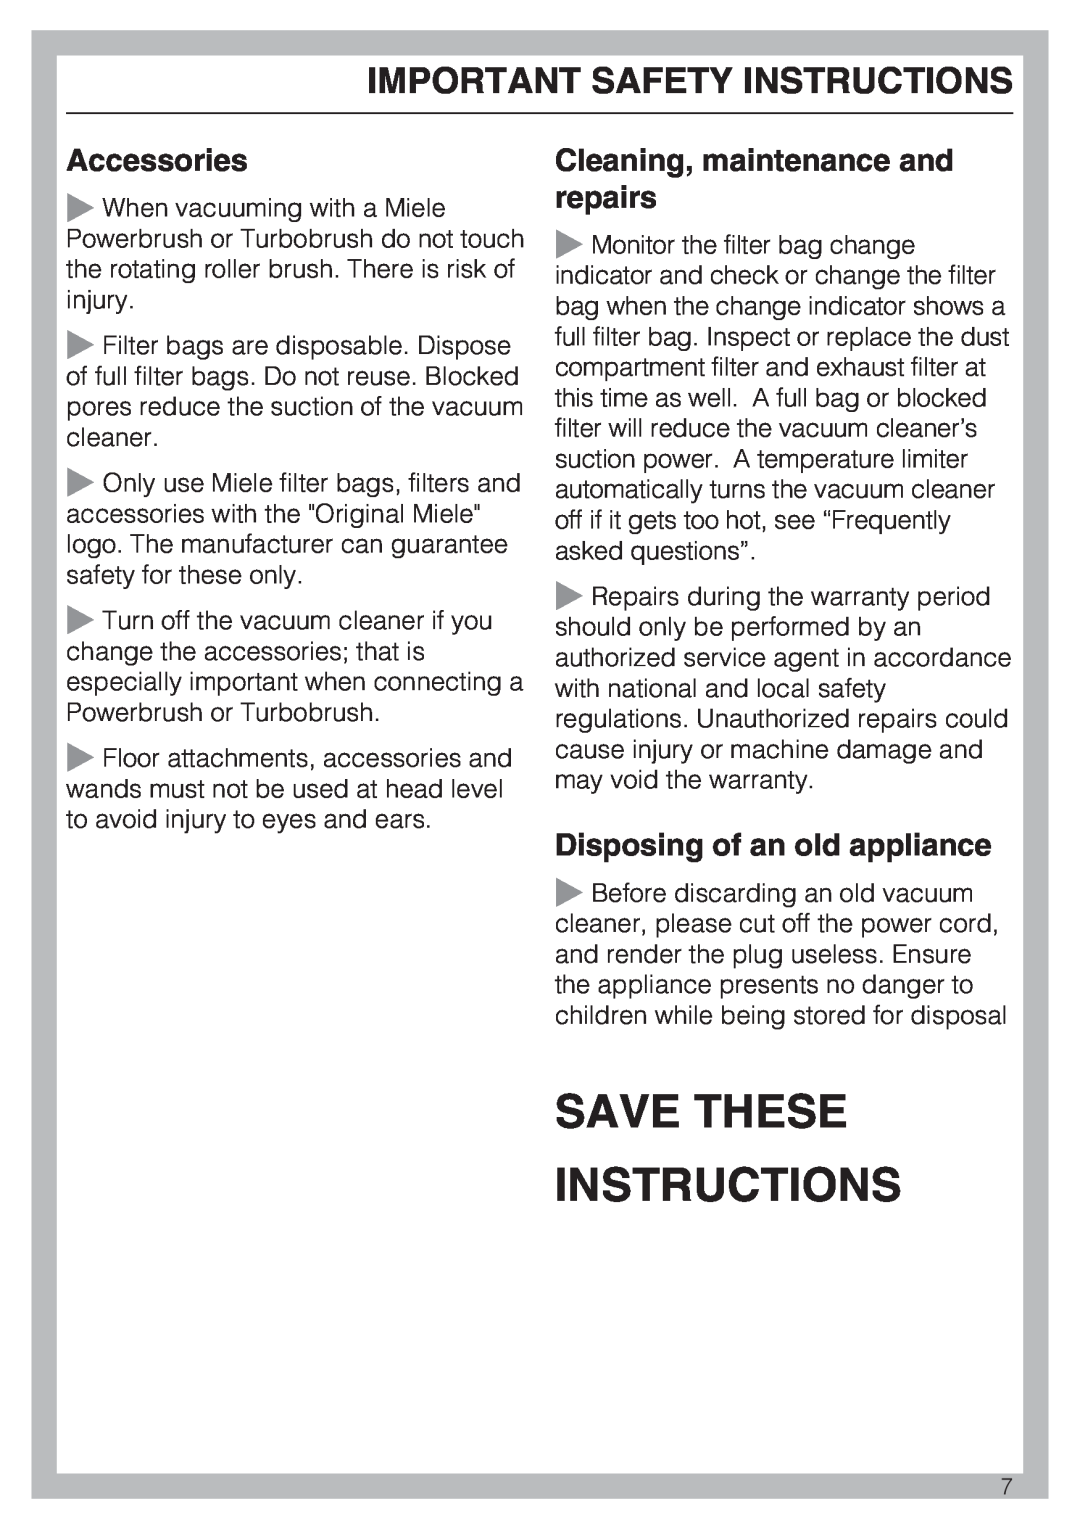 Miele S 190 Save These Instructions, Accessories, Cleaning, maintenance and repairs, Disposing of an old appliance 